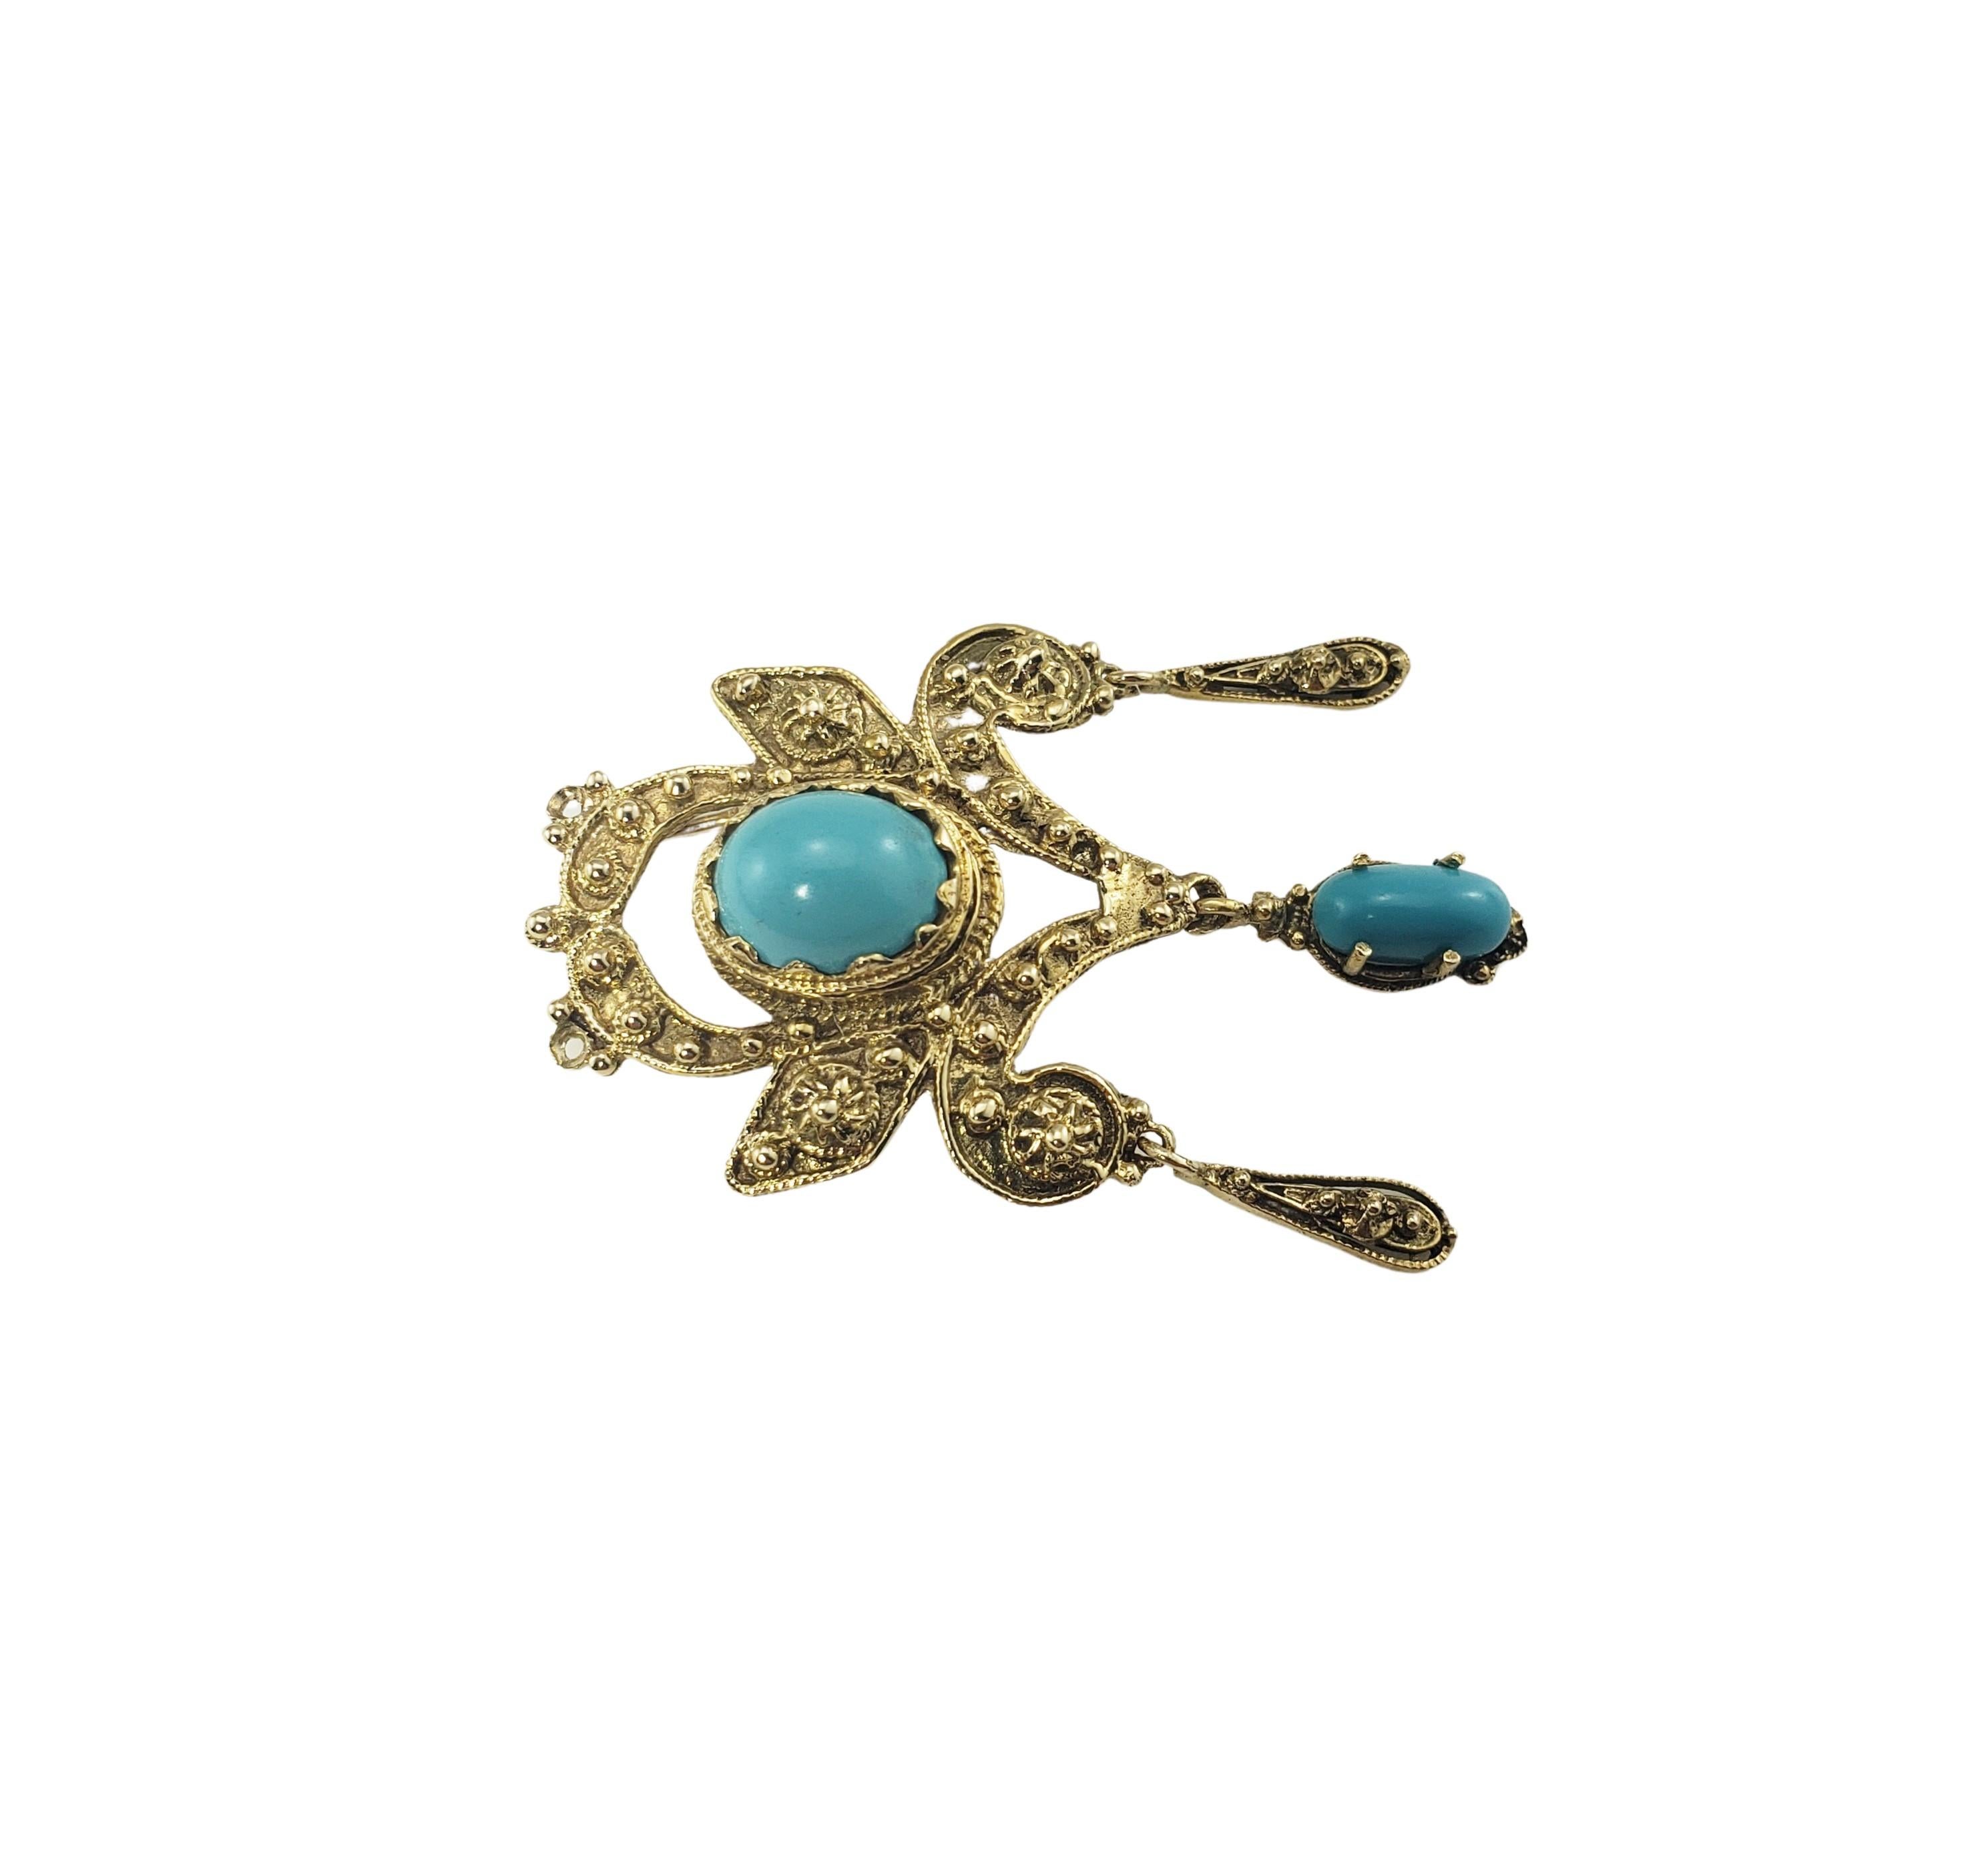 14 Karat Yellow Gold and Turquoise Brooch/Pendant-

This elegant brooch features two oval cabochon turquoise stones (large: 10 mm x 7 mm, small: (9 mm x 4 mm) set in beautifully detailed 14K yellow gold.  Can be worn as a brooch or a pendant.

Size: